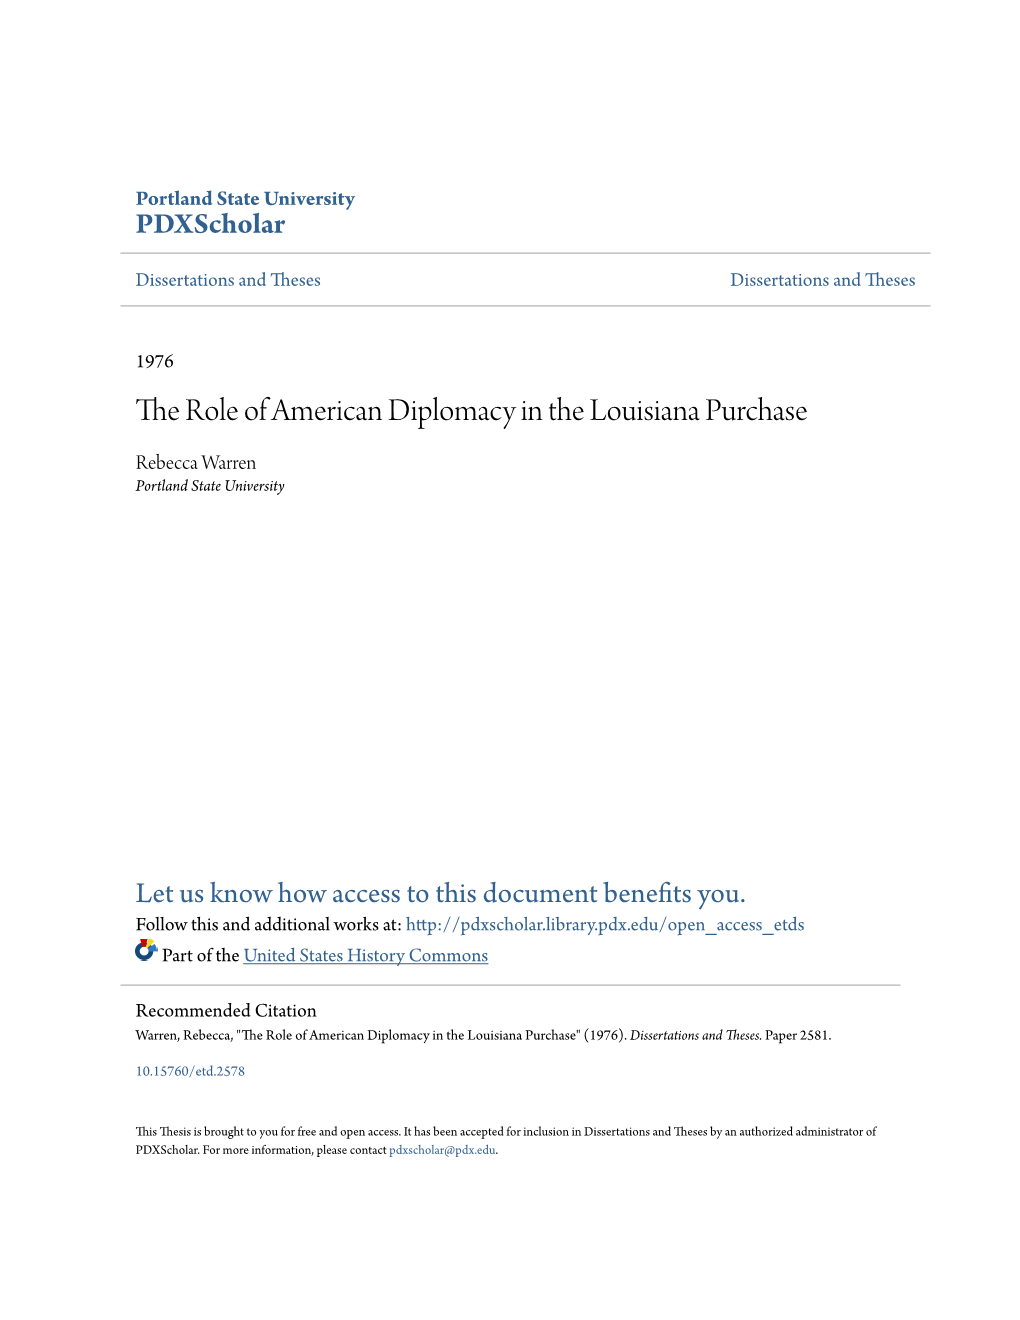 The Role of American Diplomacy in the Louisiana Purchase